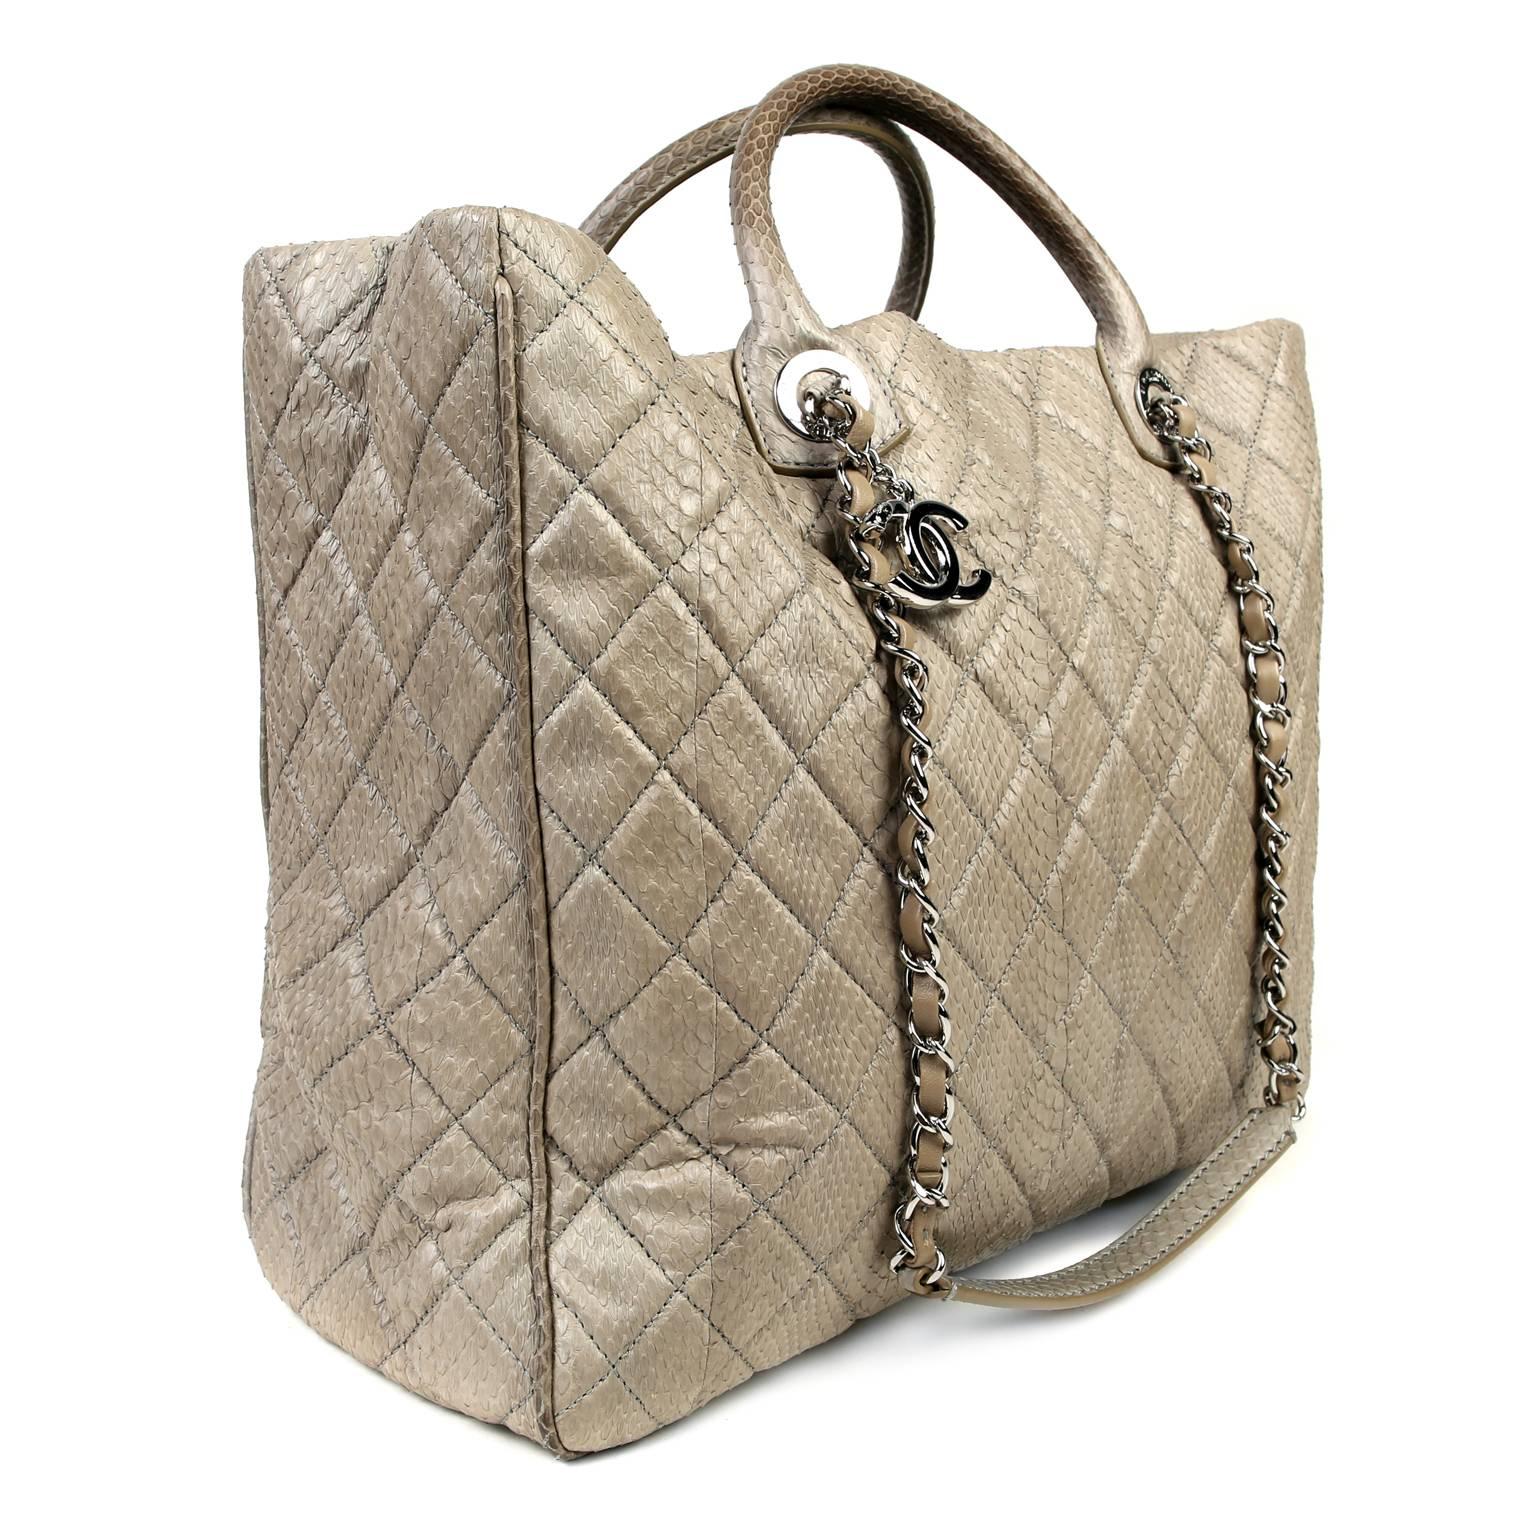 This Authentic Chanel Taupe Python Shopper is in pristine unworn condition.  A stunning exotic, the classic silhouette is certain to hold its value while becoming a treasured favorite. 

Taupe python skin is quilted in signature Chanel diamond